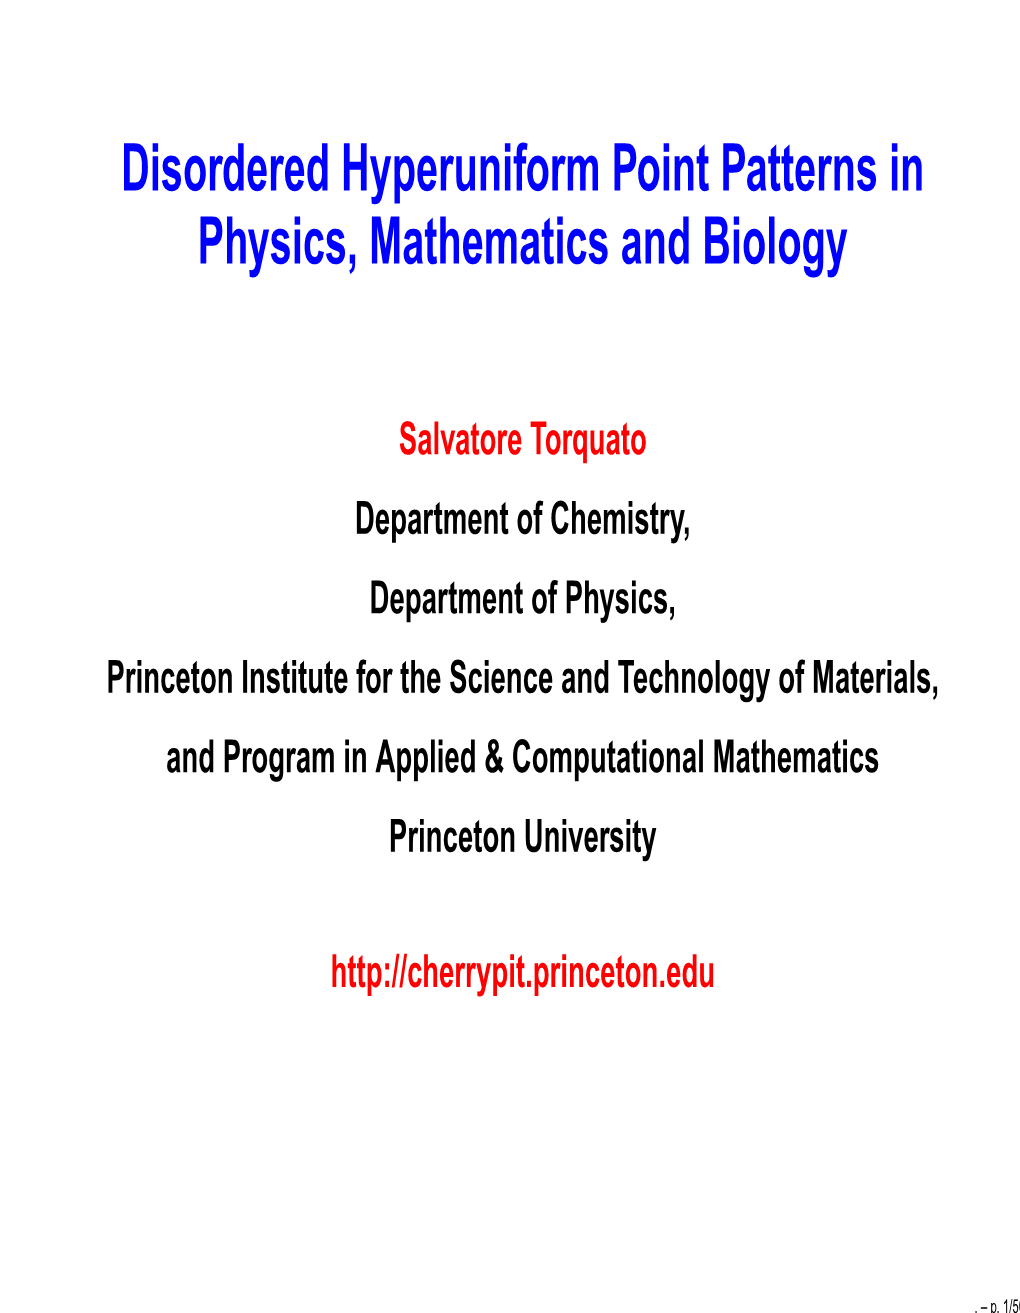 Disordered Hyperuniform Point Patterns in Physics, Mathematics and Biology